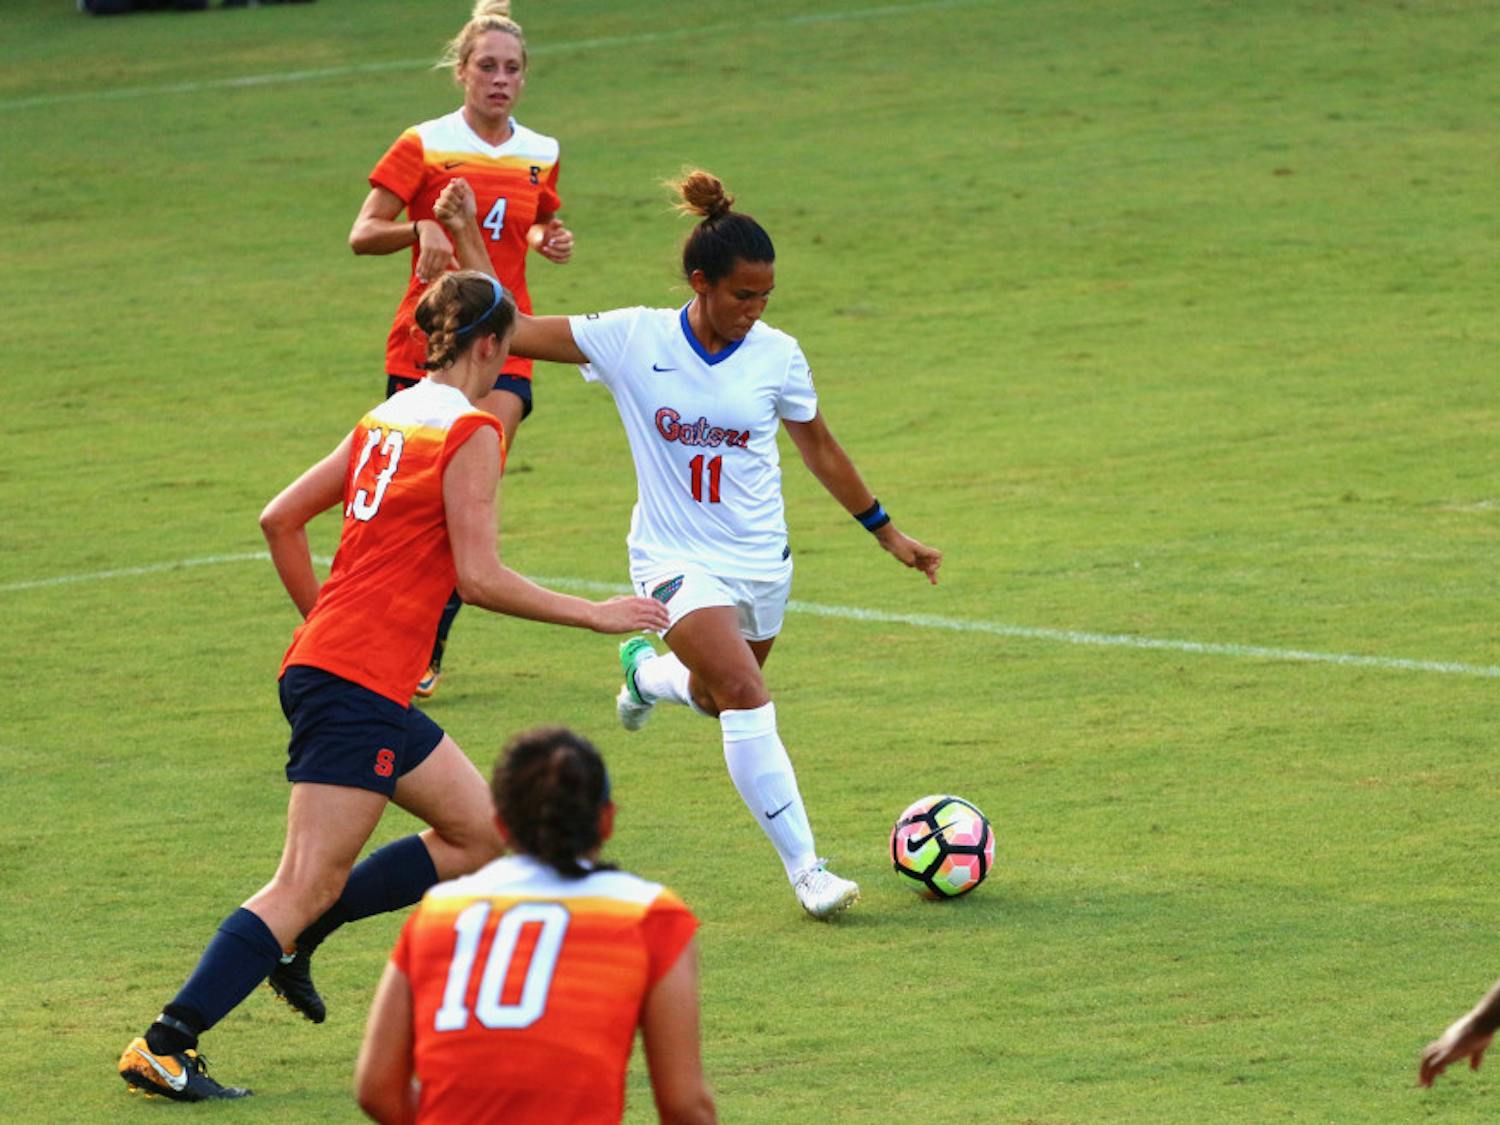 UF midfielder Briana Solis scored the game-winning goal against Tennessee on Sunday in Knoxville. 